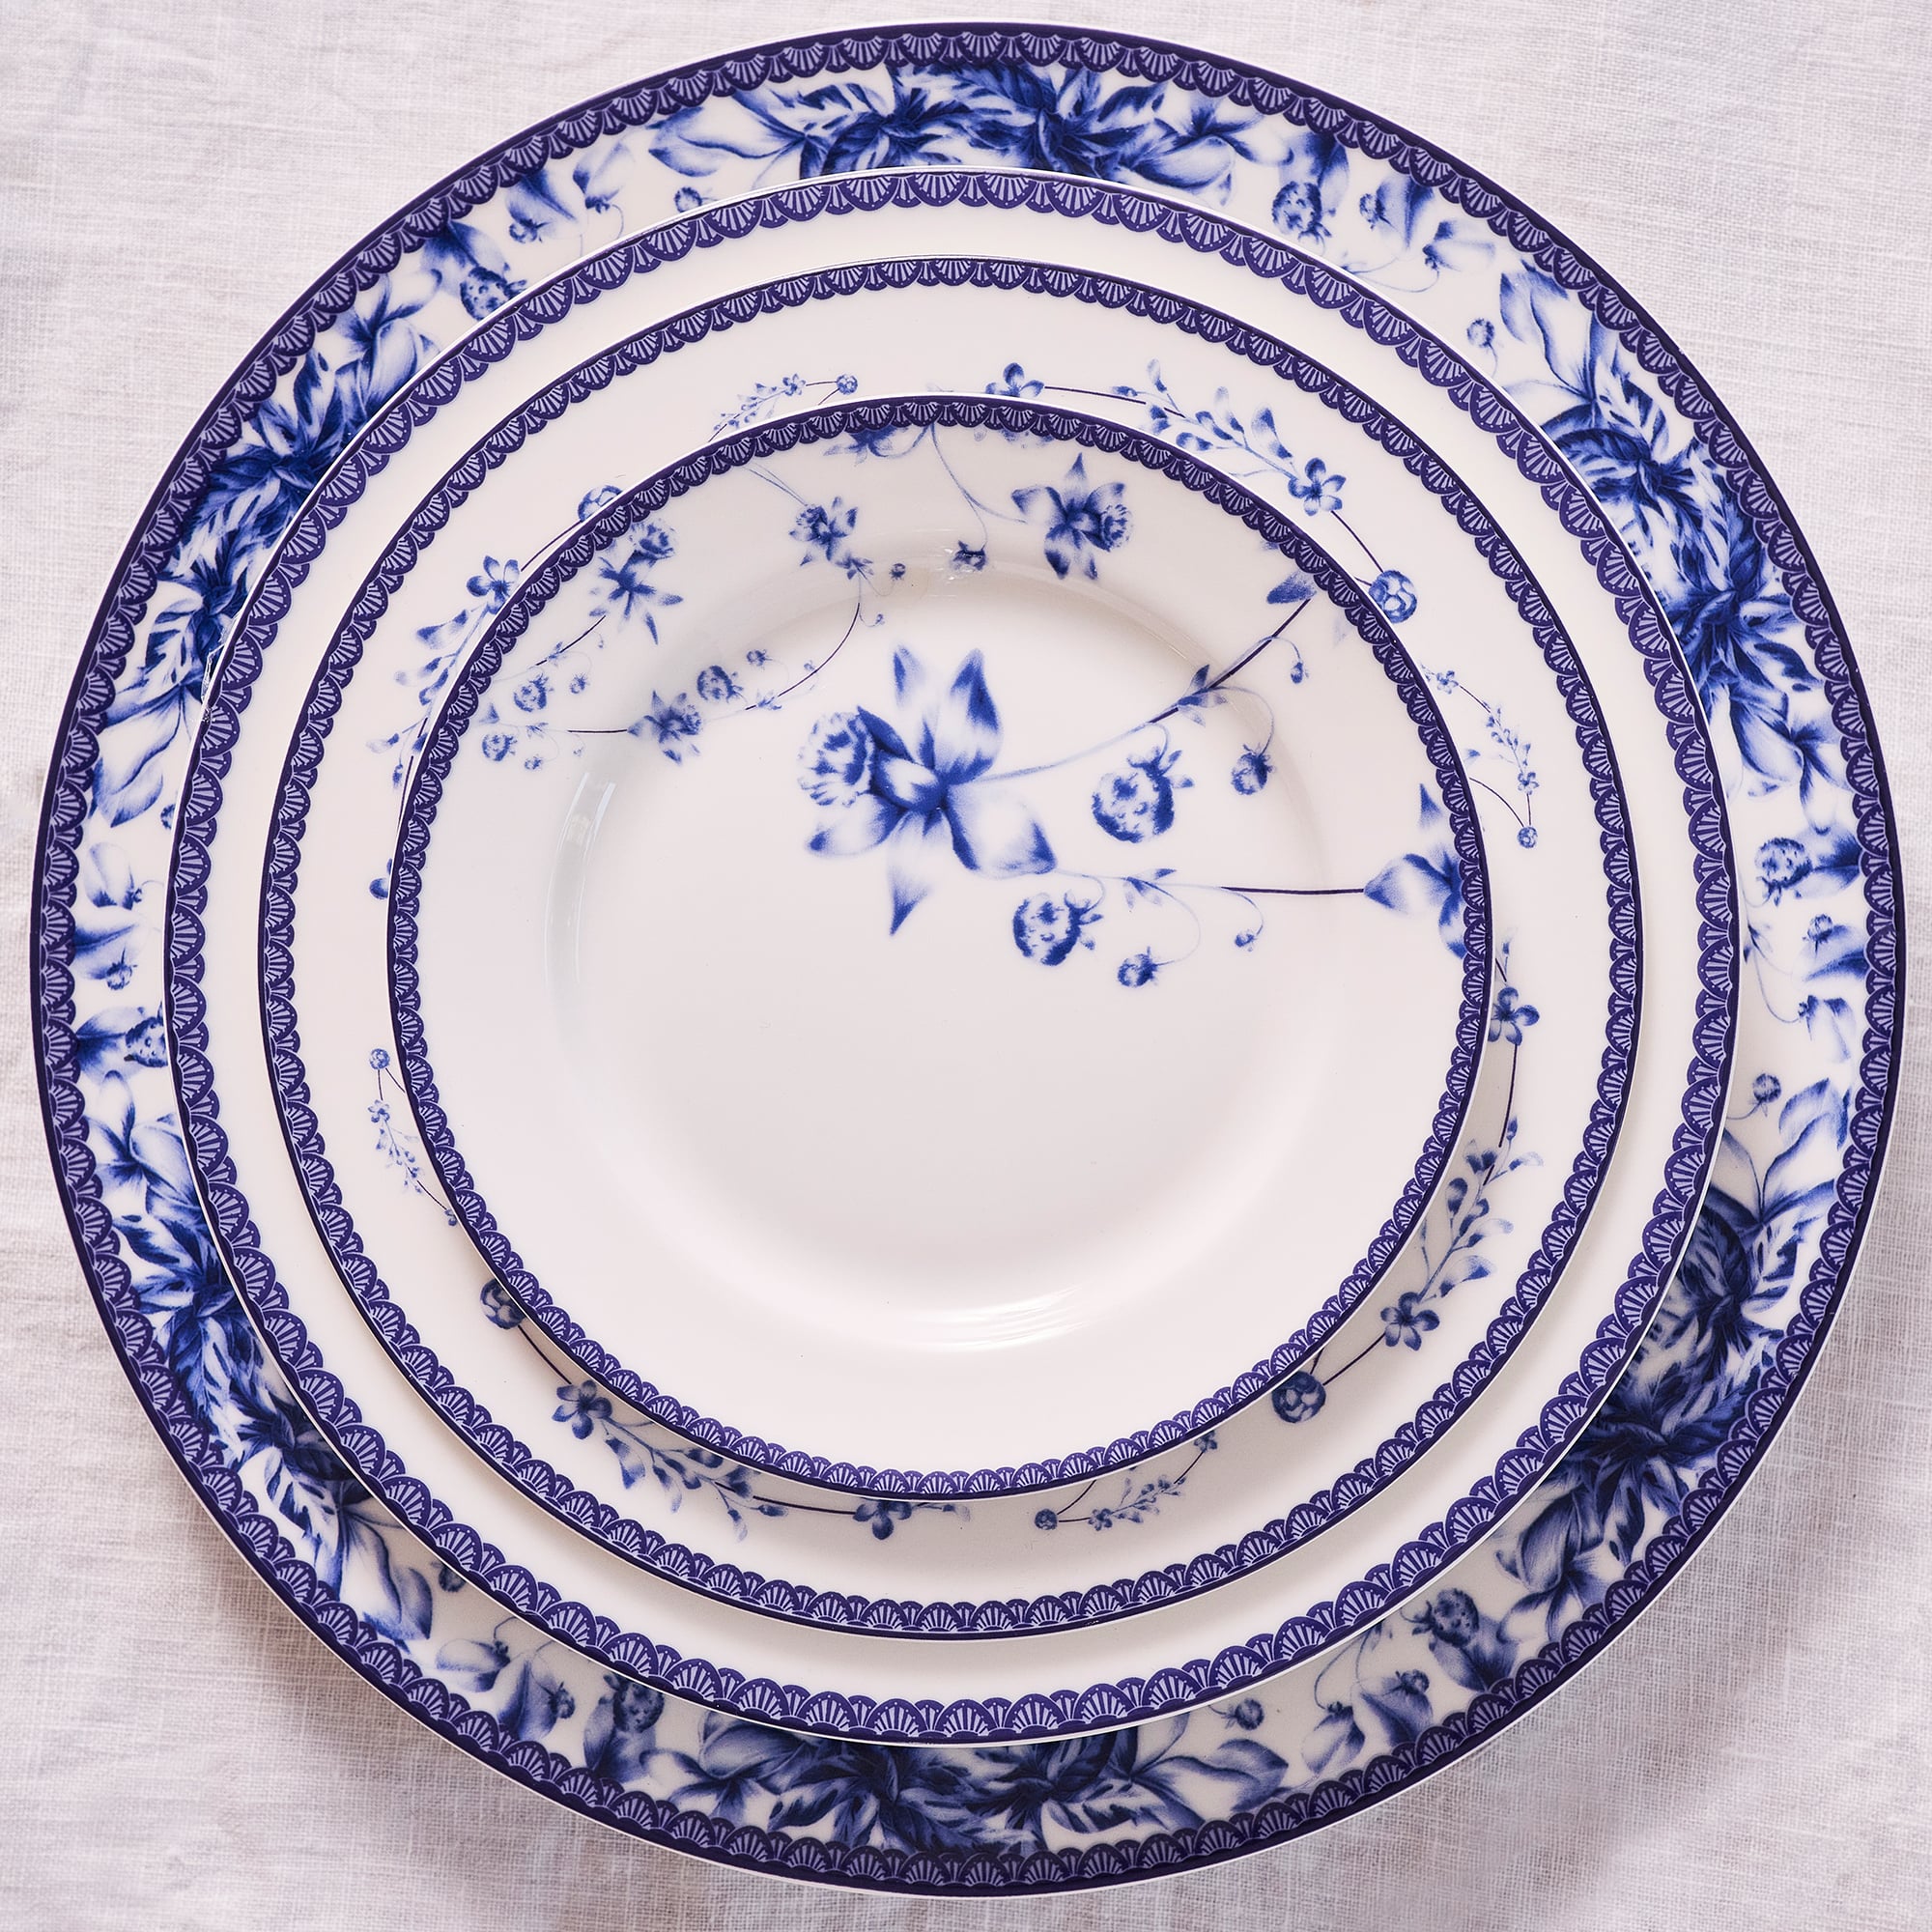 11-Inch Porcelain Plate - Set of Four